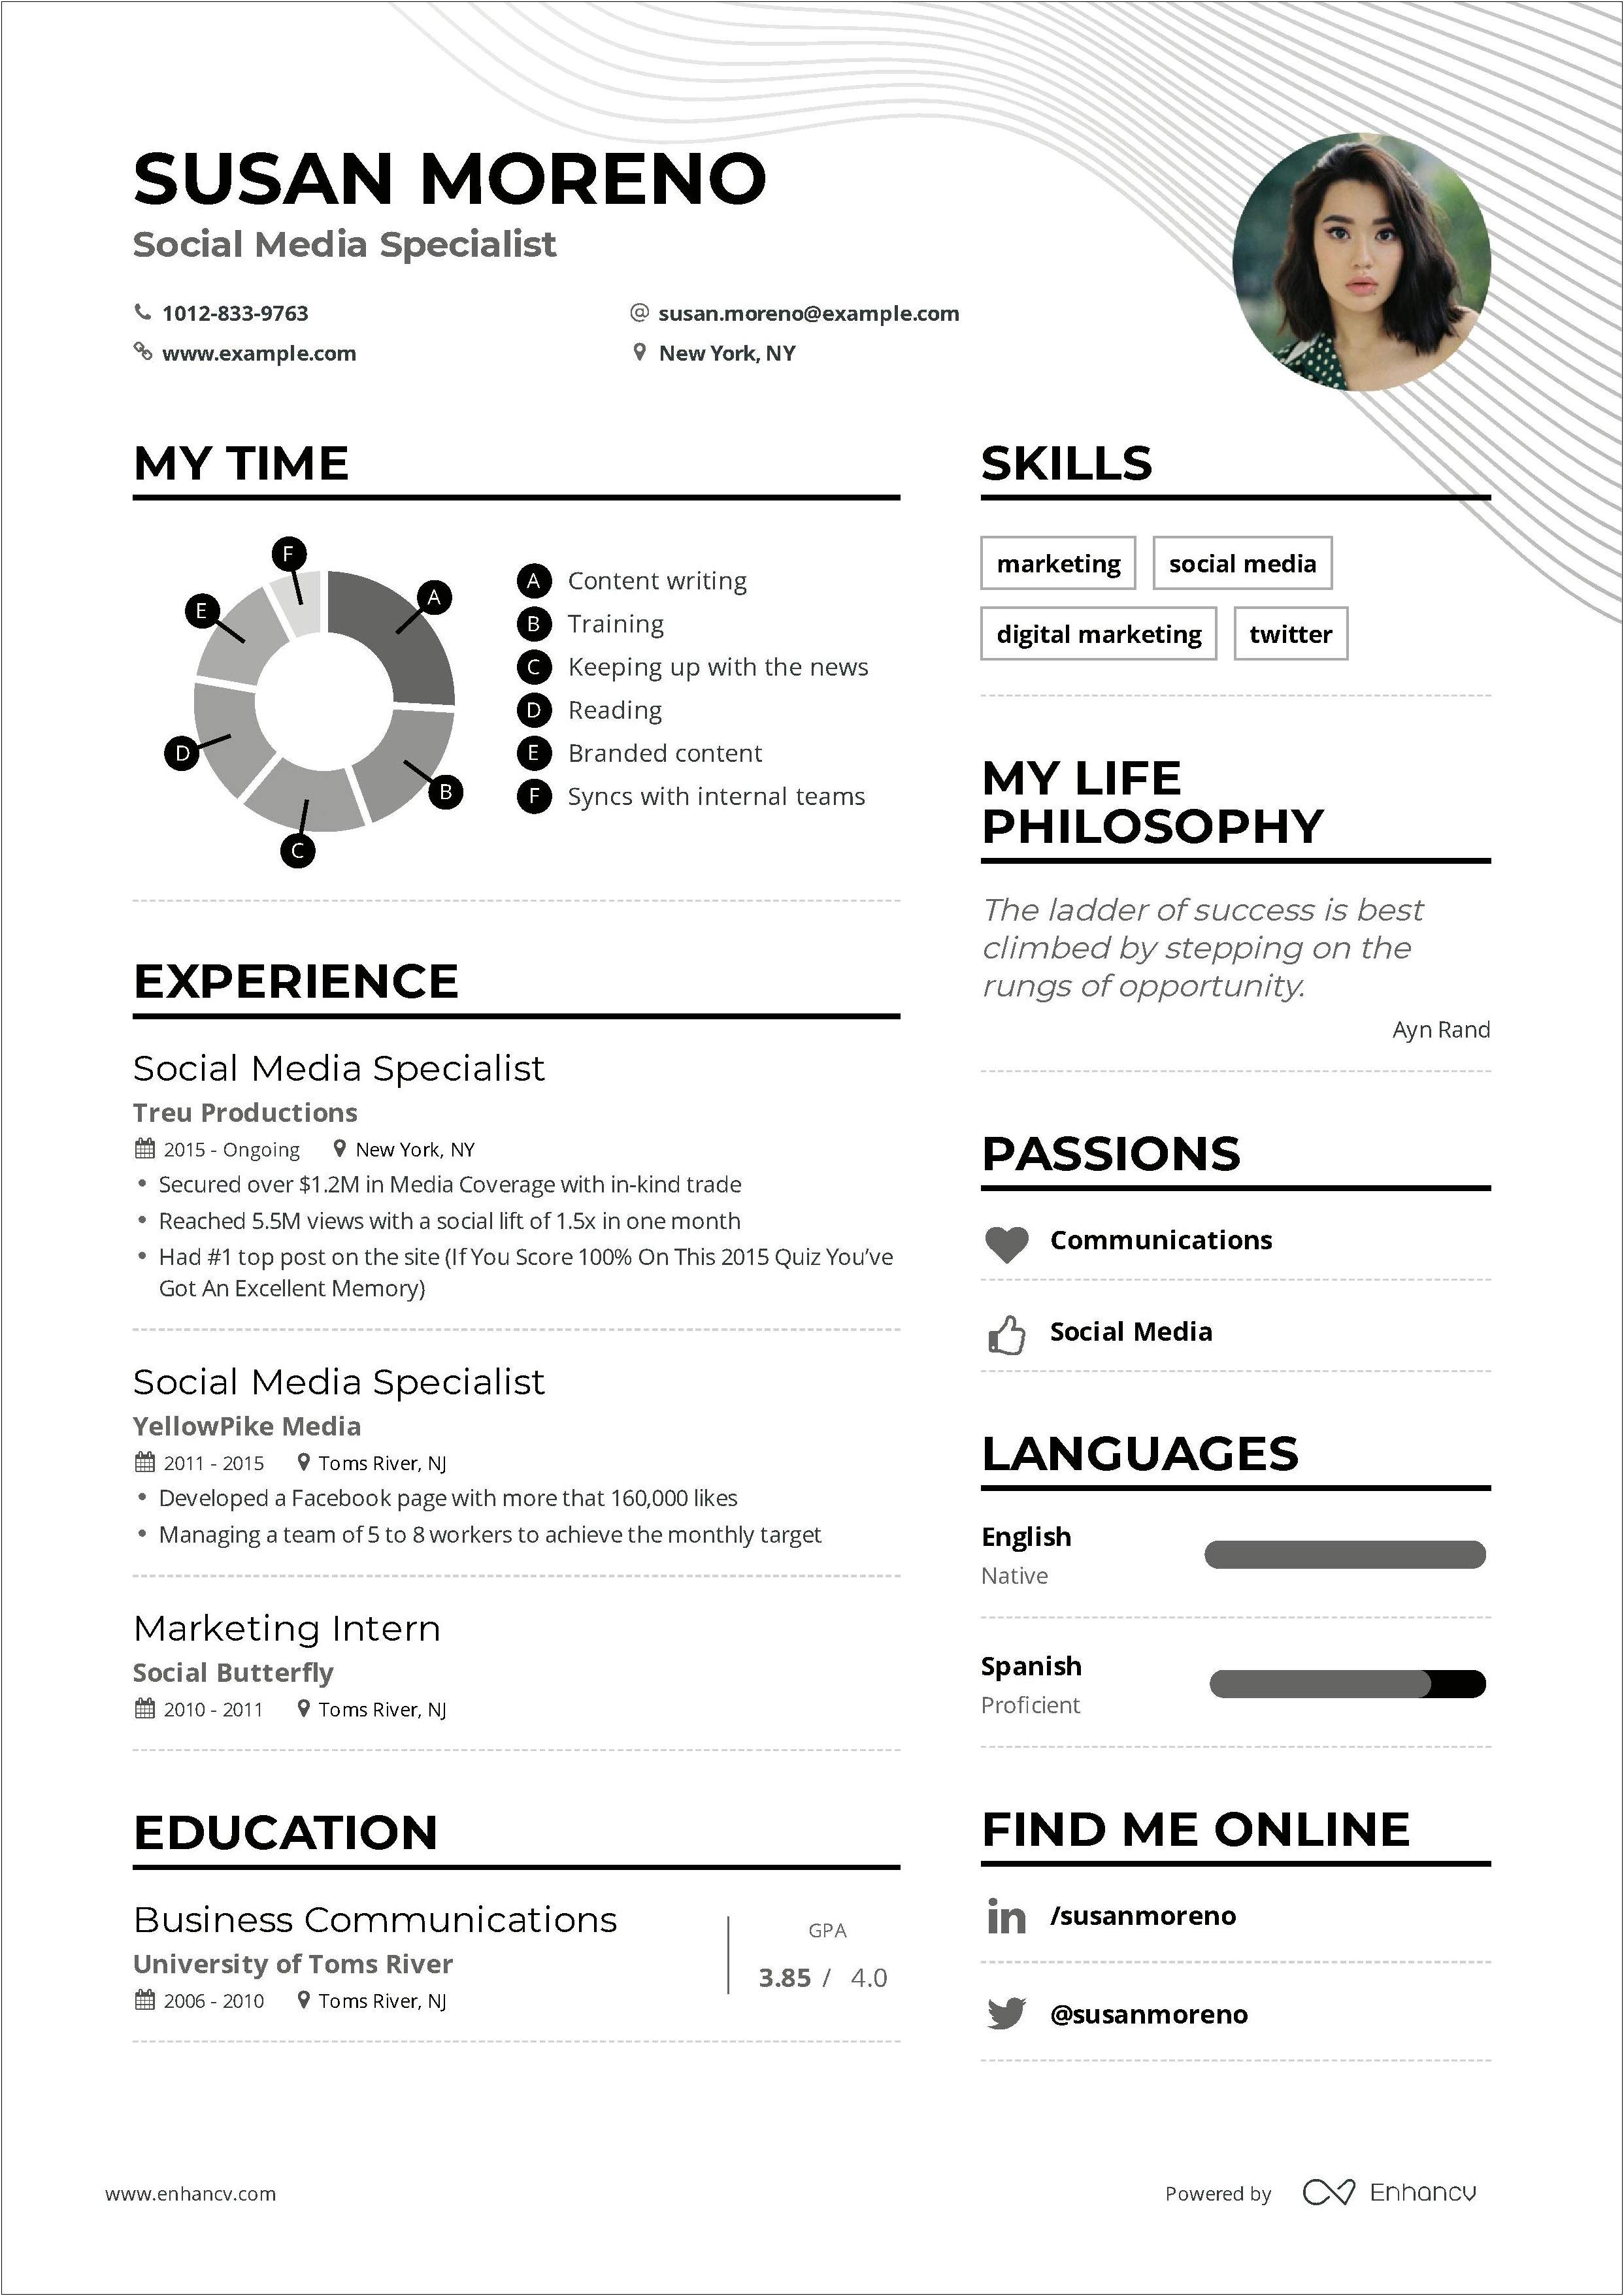 Can You Put Social Media Skills On Resume